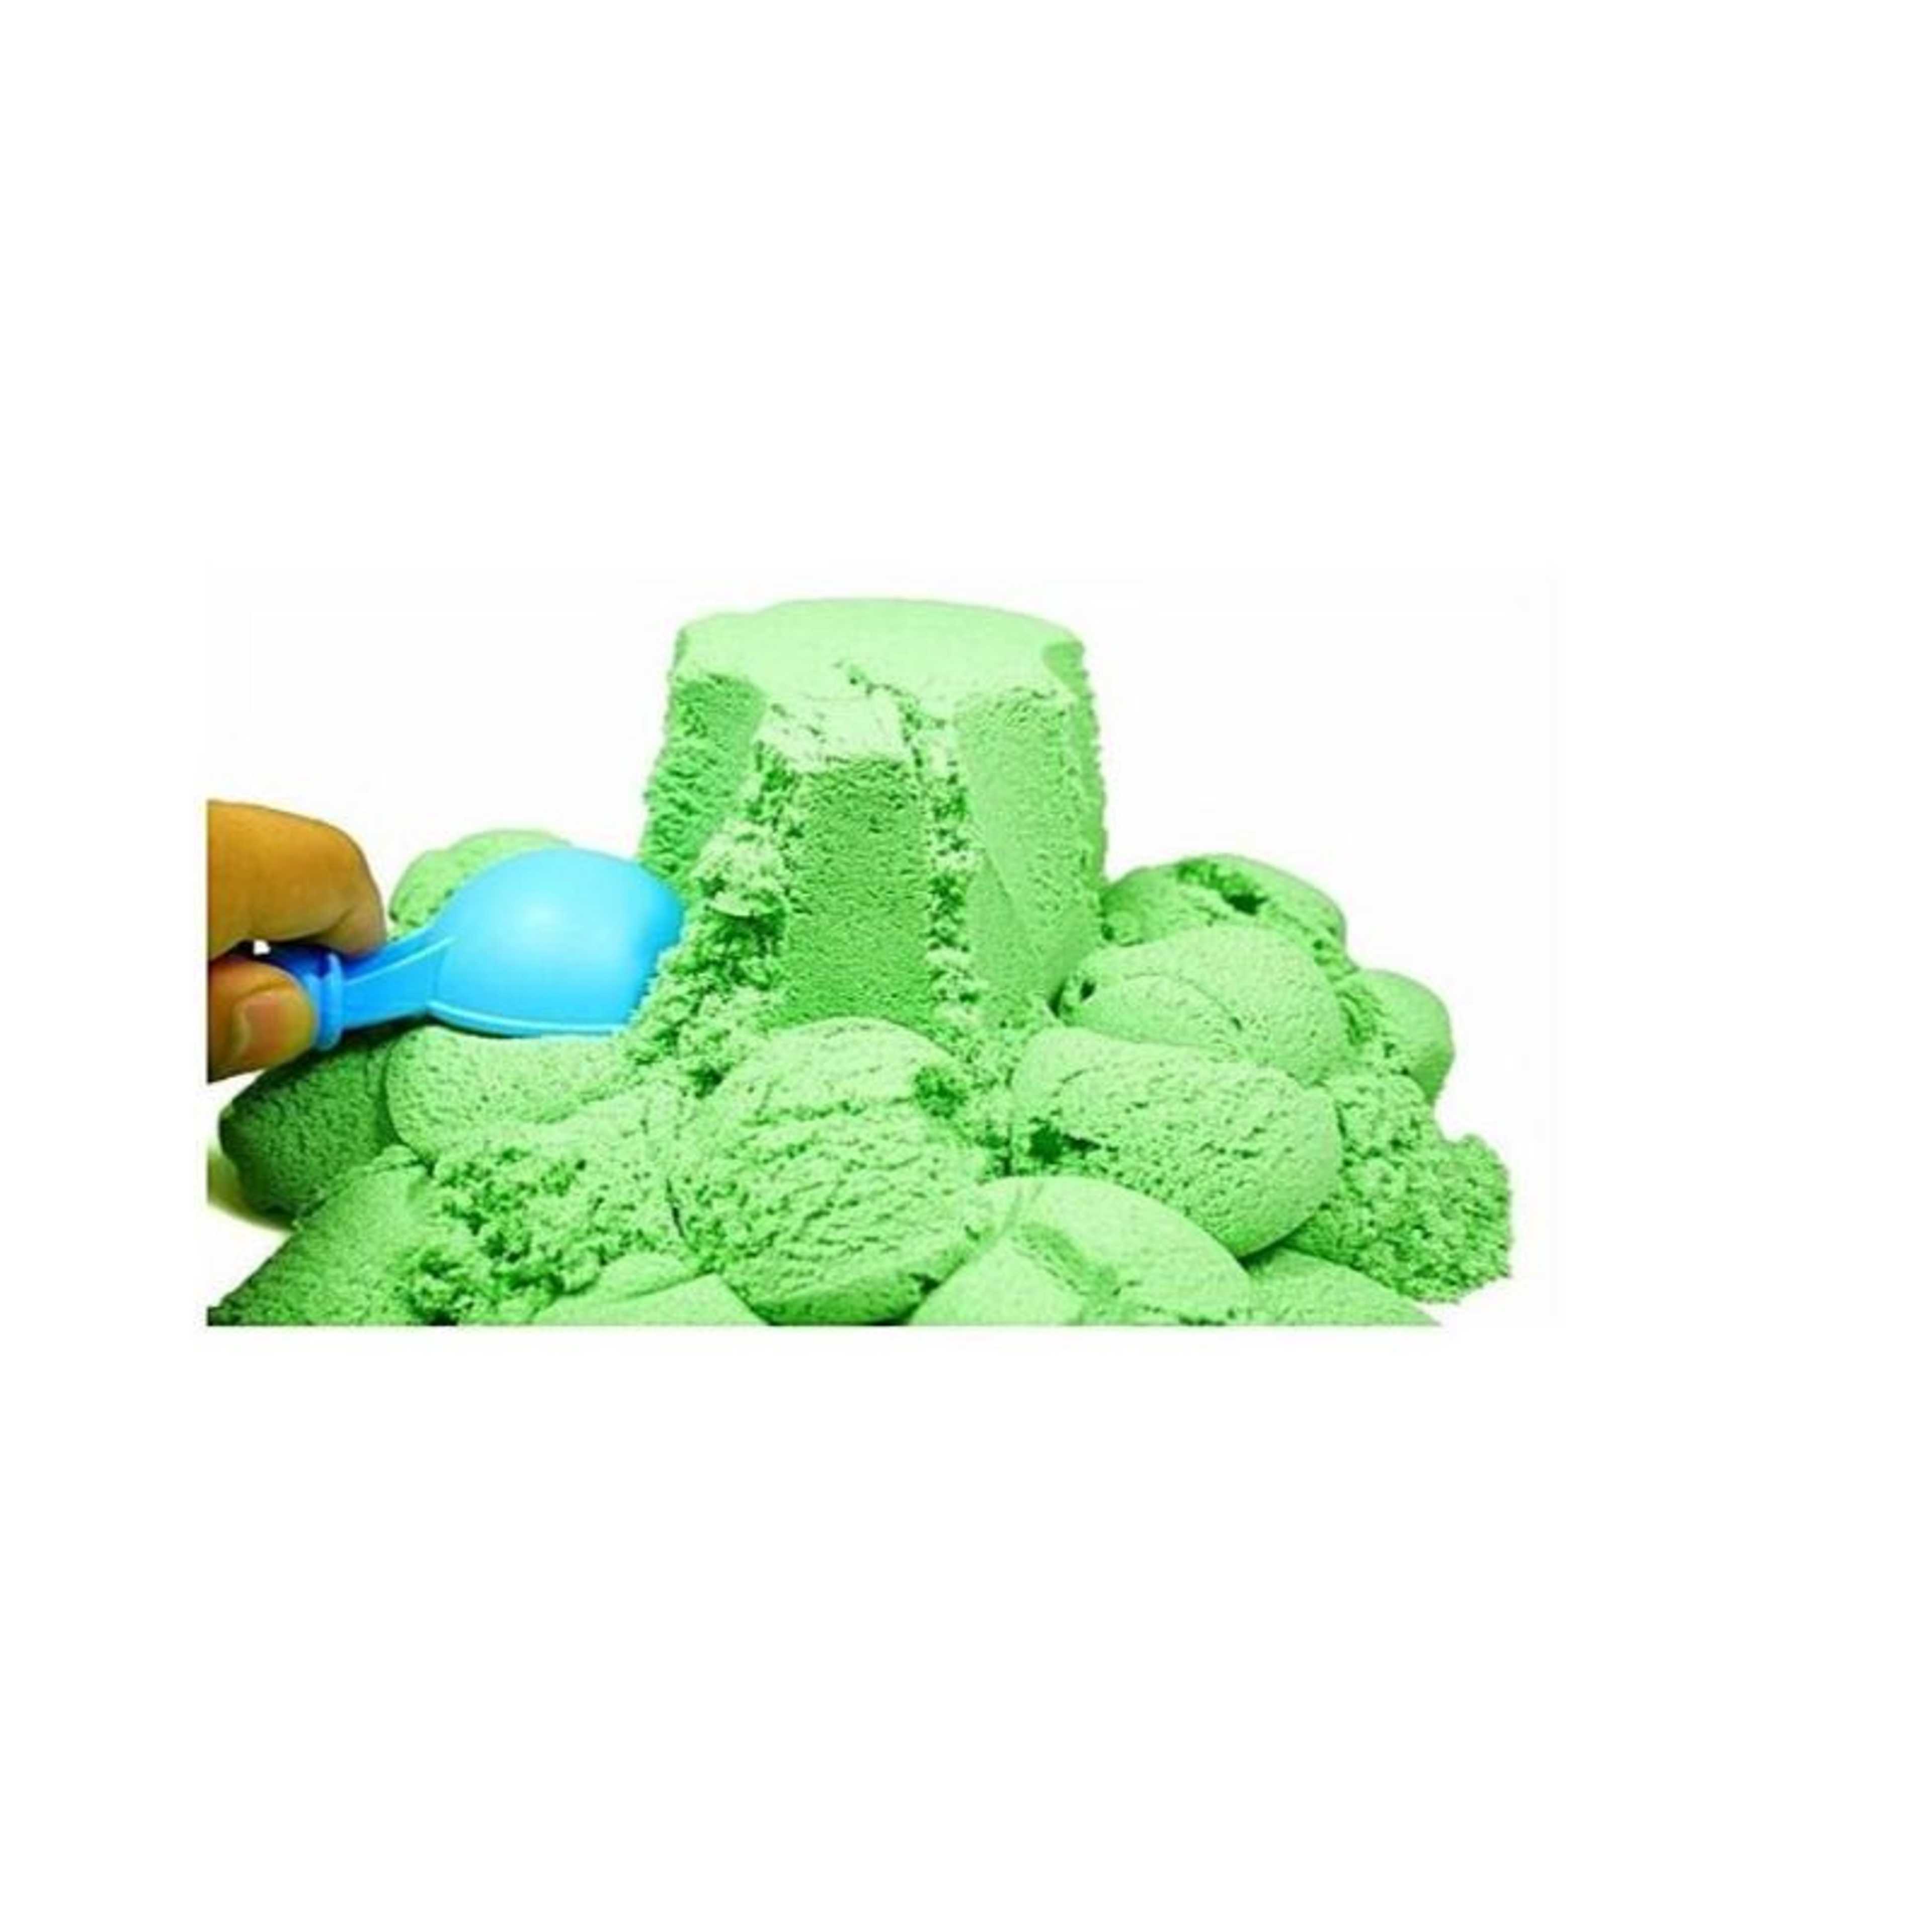 0.5 KG Green Kinetic Sand Pouch For Kids with FREE Castle Molds